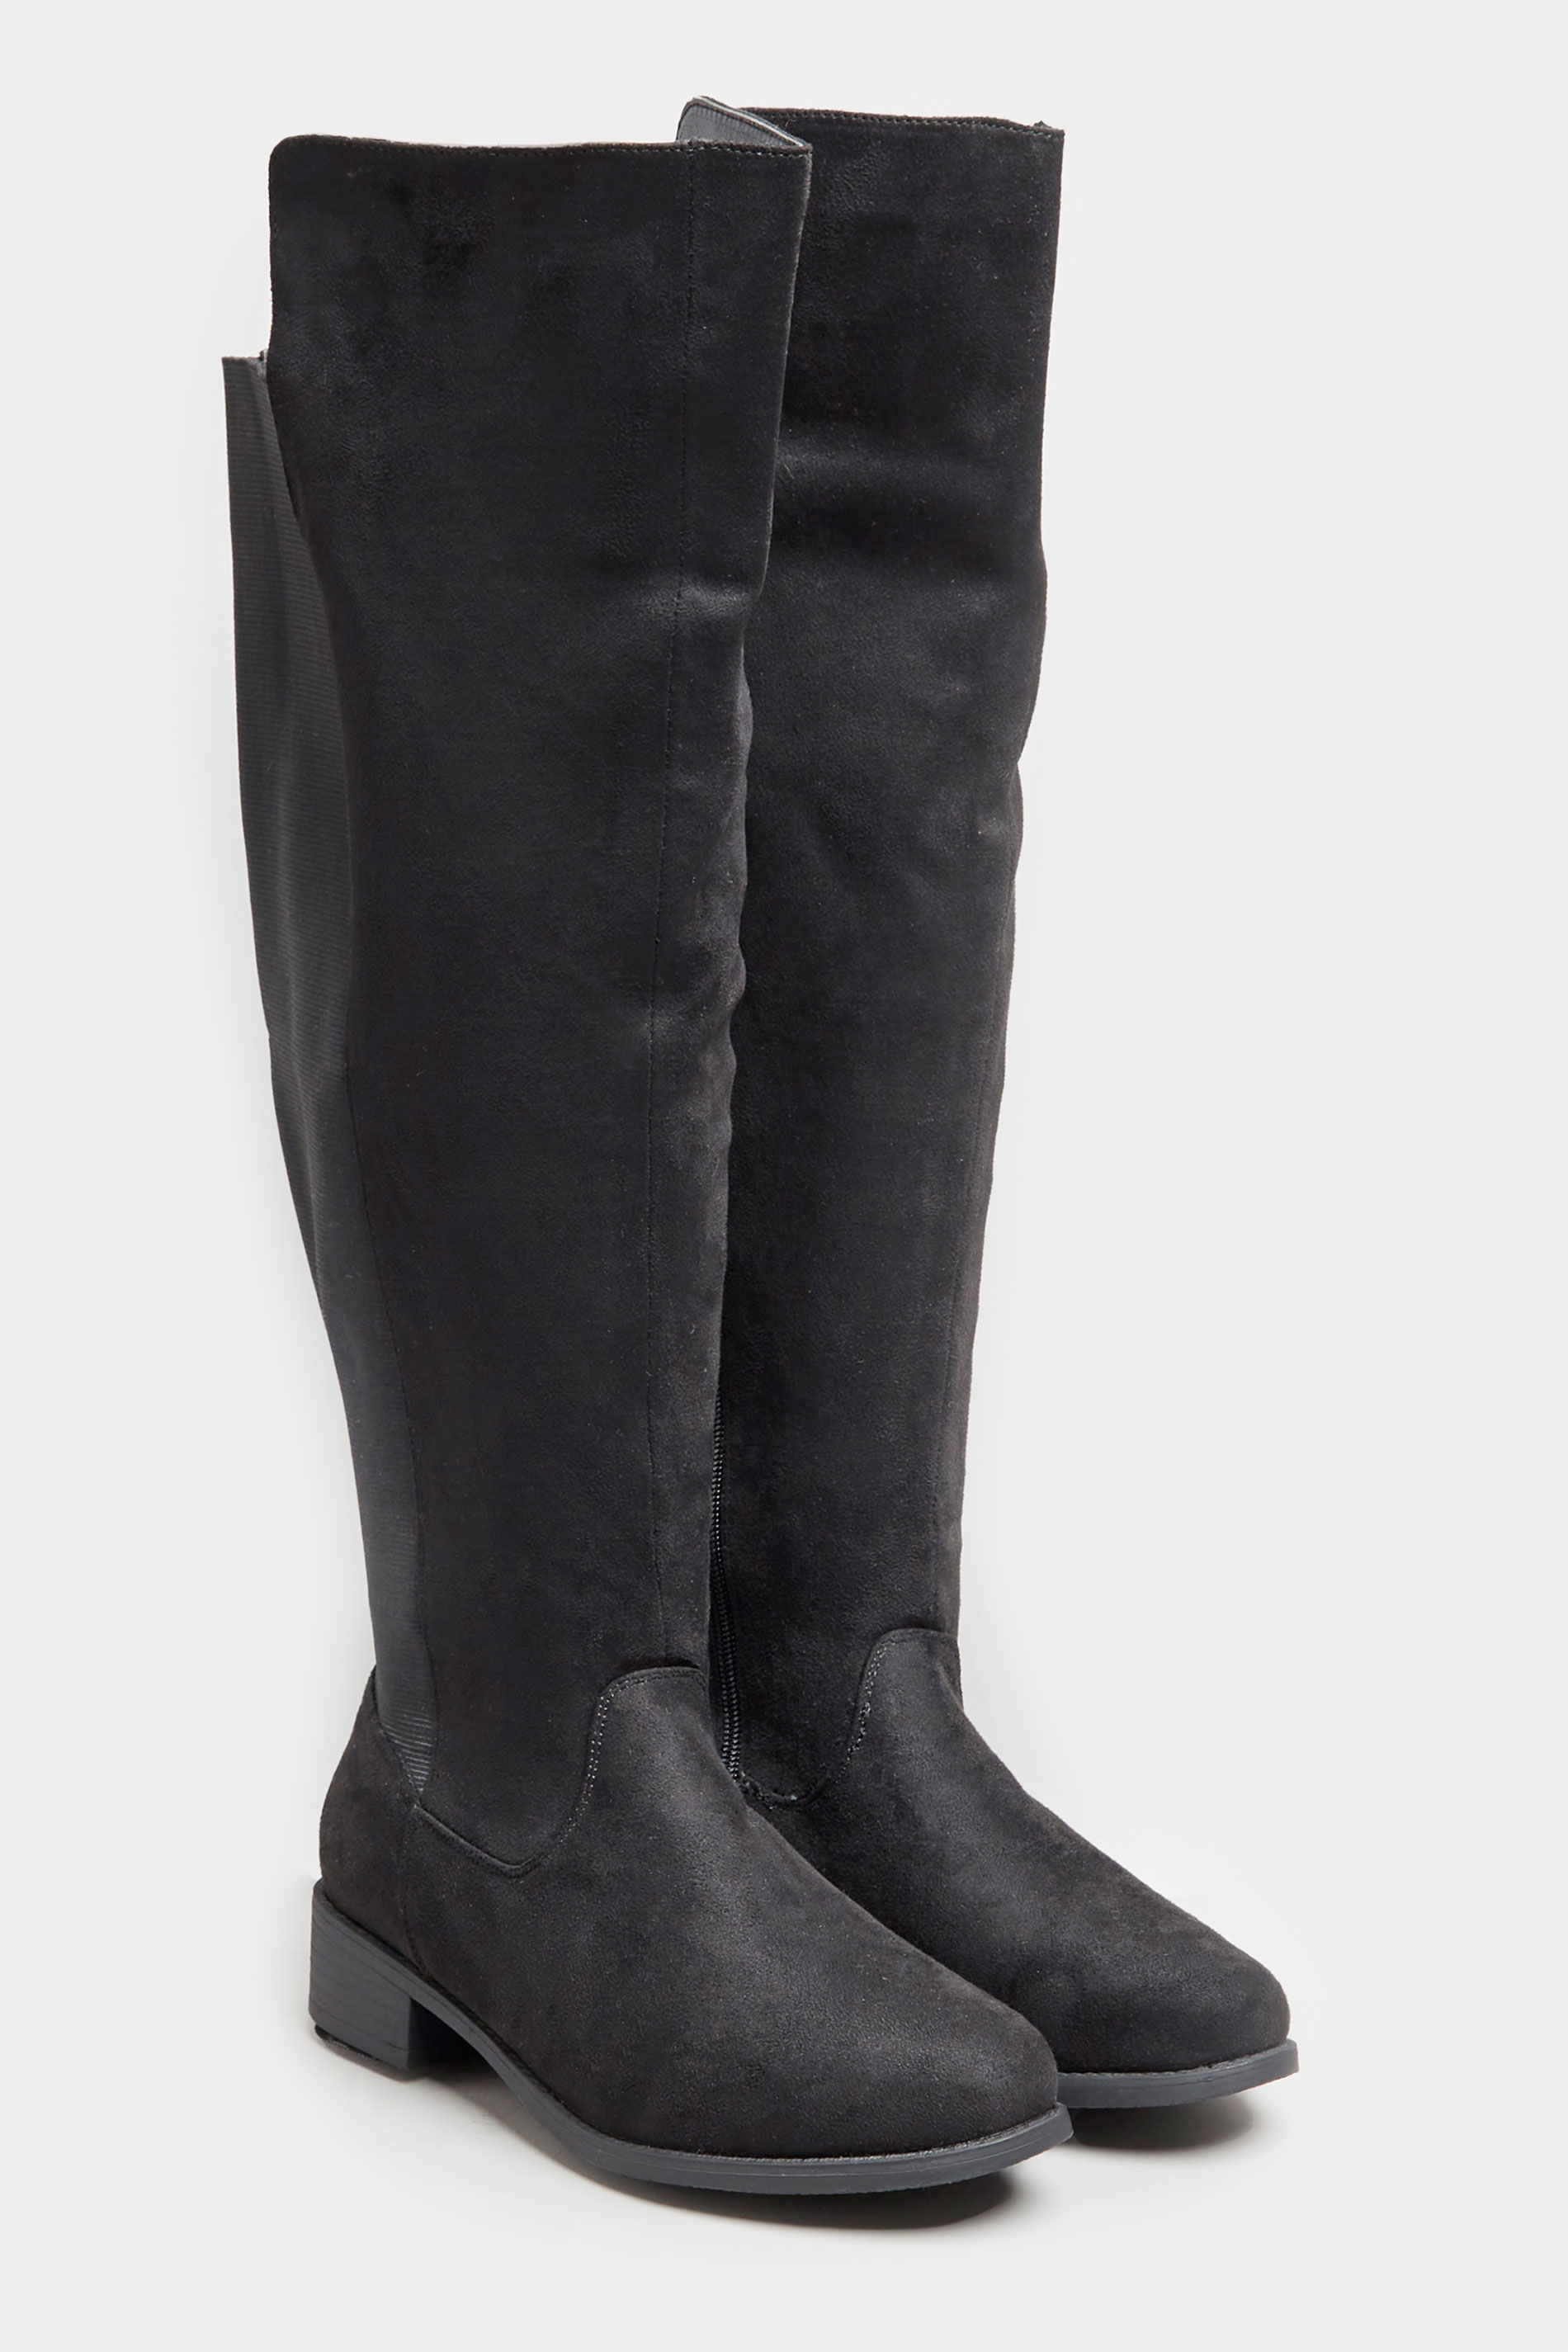 Black Stretch Vegan Suedette Over The Knee Boots In Extra Wide Fit_R.jpg